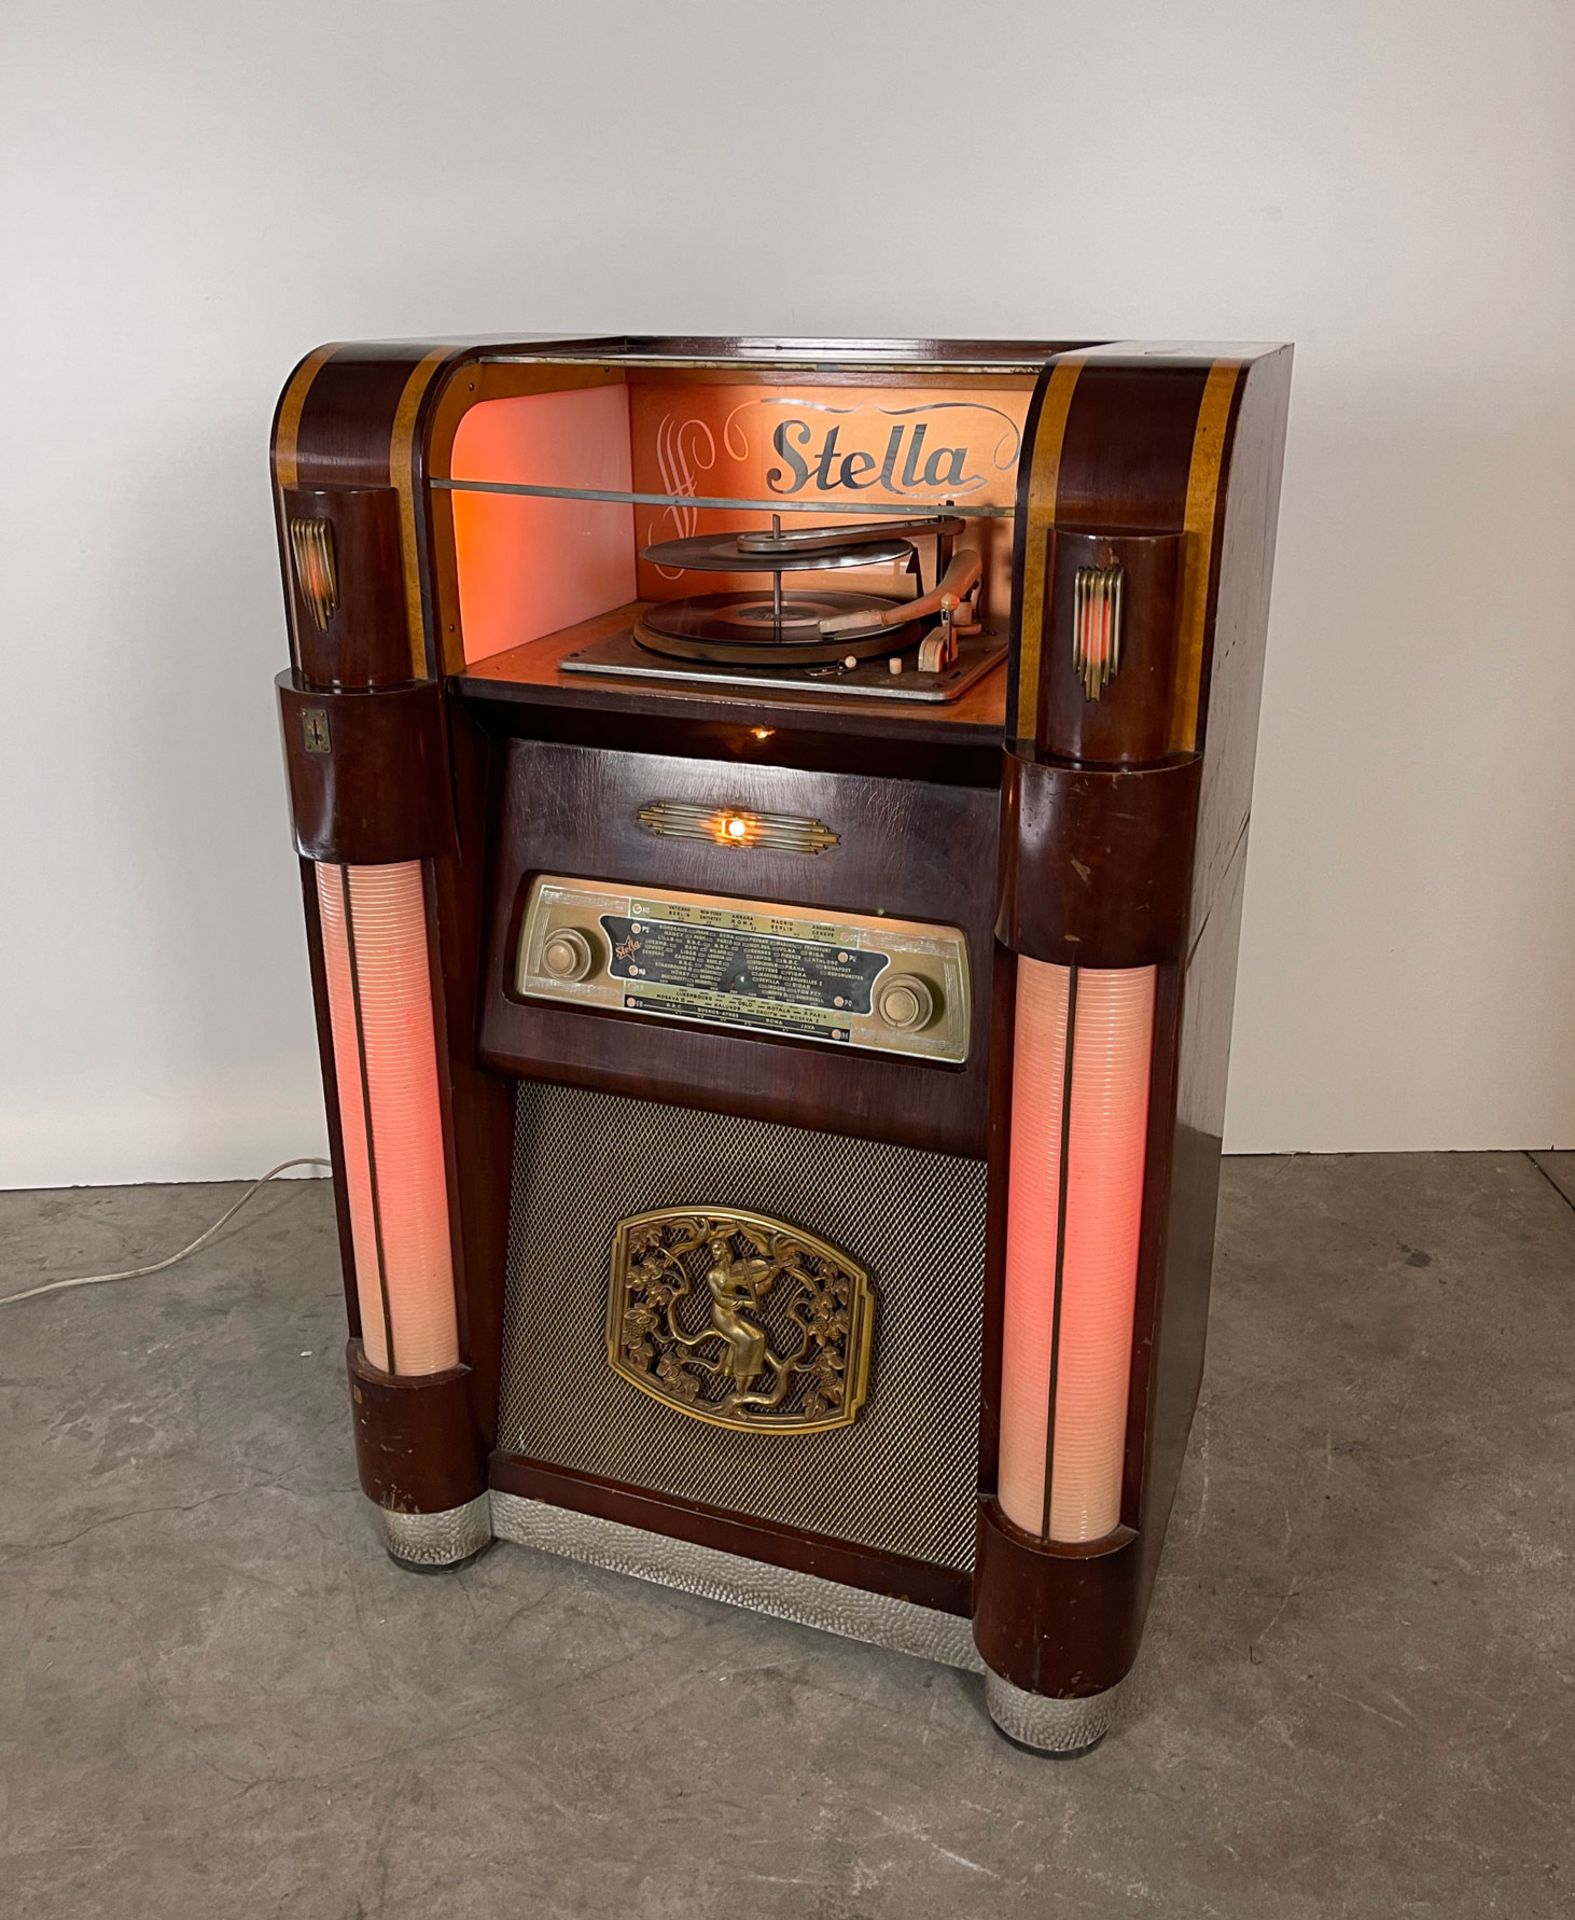 1954 Belgian Stella 531 Coin-Op Record Player with Built-In Radio - Image 2 of 15